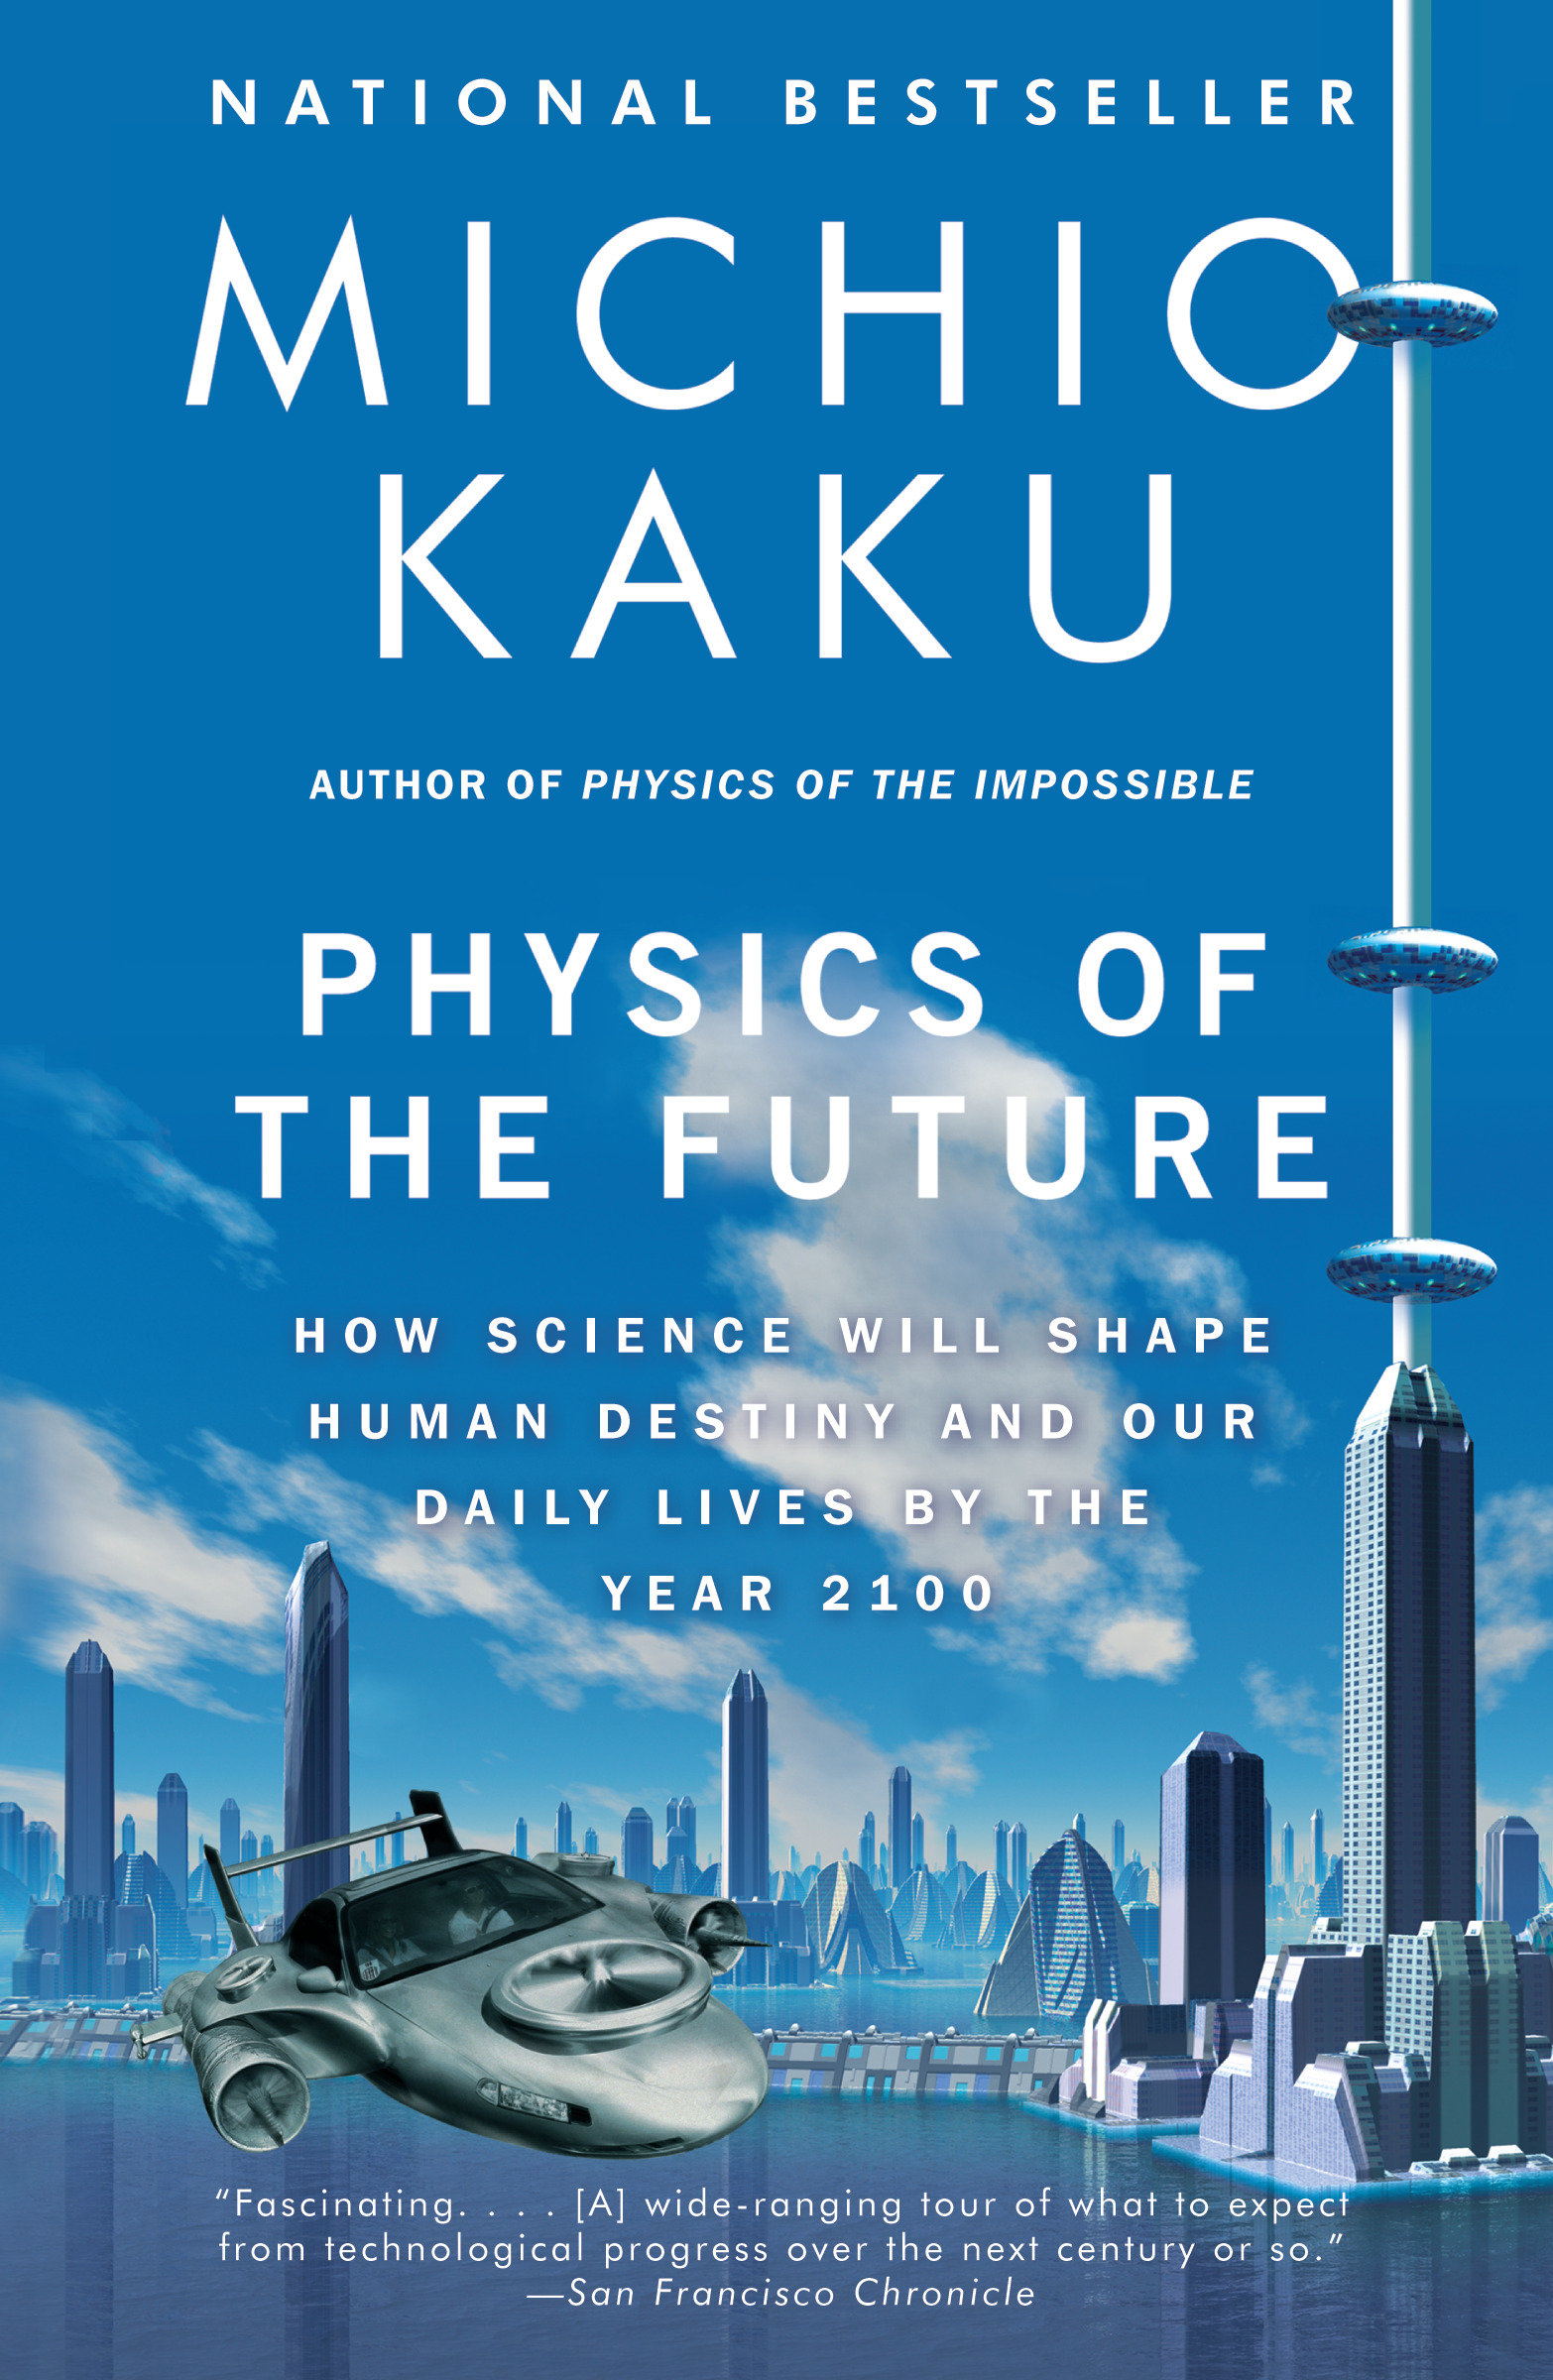 Physics of the future how science will shape human destiny and our daily lives by the year 2100 cover image